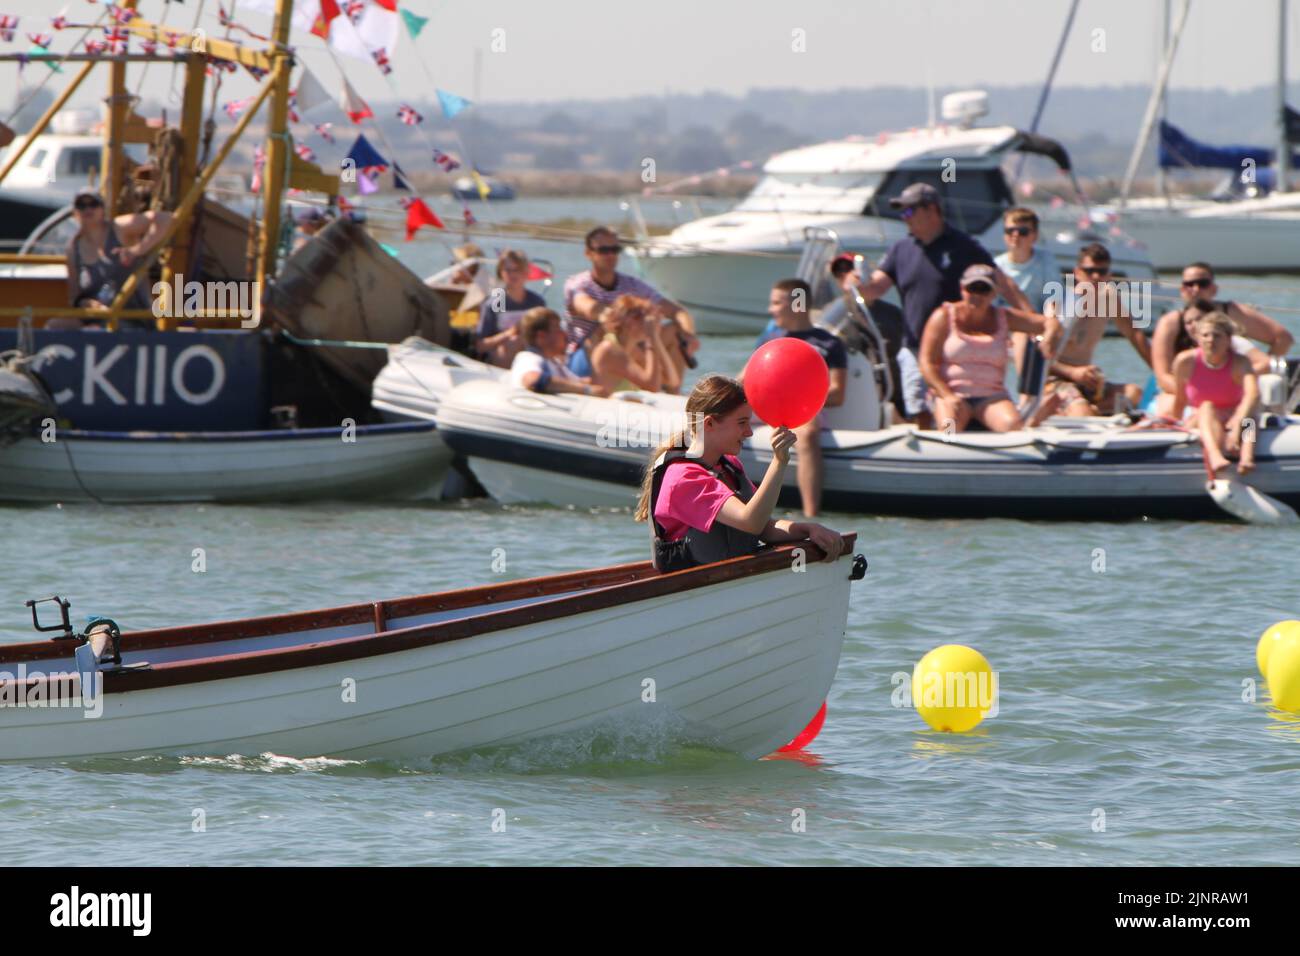 West Mersea Regatta is taking place on Mersea Island. The regatta has been run almost continually since 1838 and is organised by volunteers. The outboard dinghy balloon race in which competitors have to pick up balloons on the way to the finish line. Stock Photo